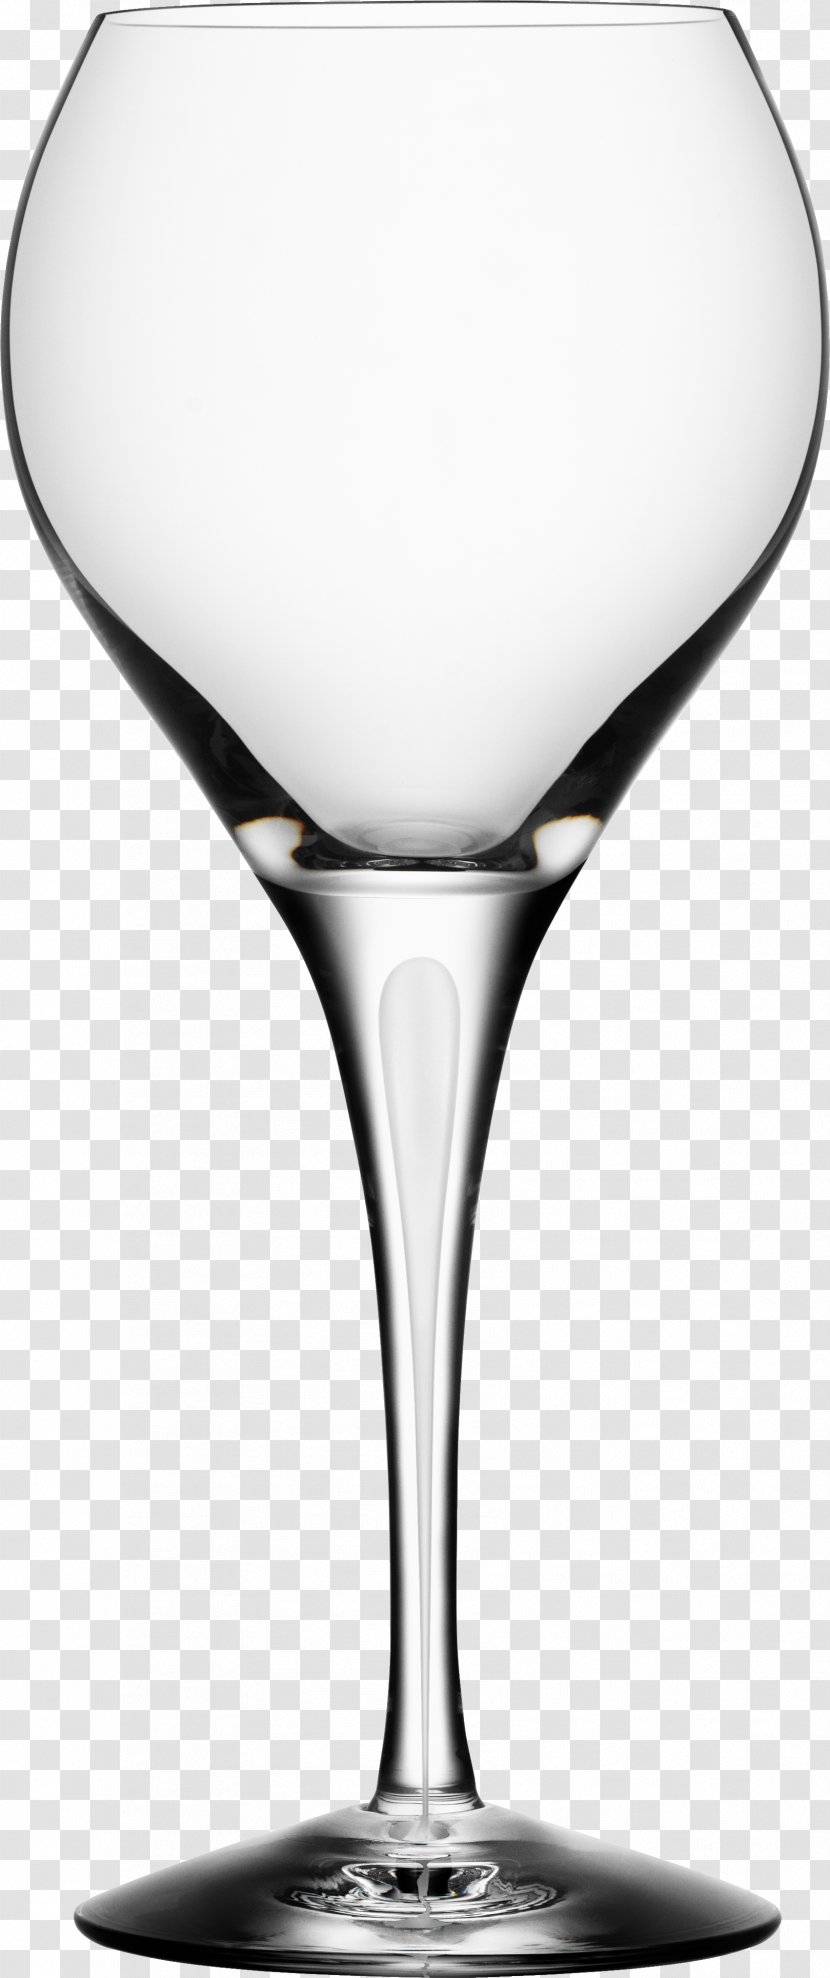 Wine Glass Cup - Cocktail - Empty Image Transparent PNG